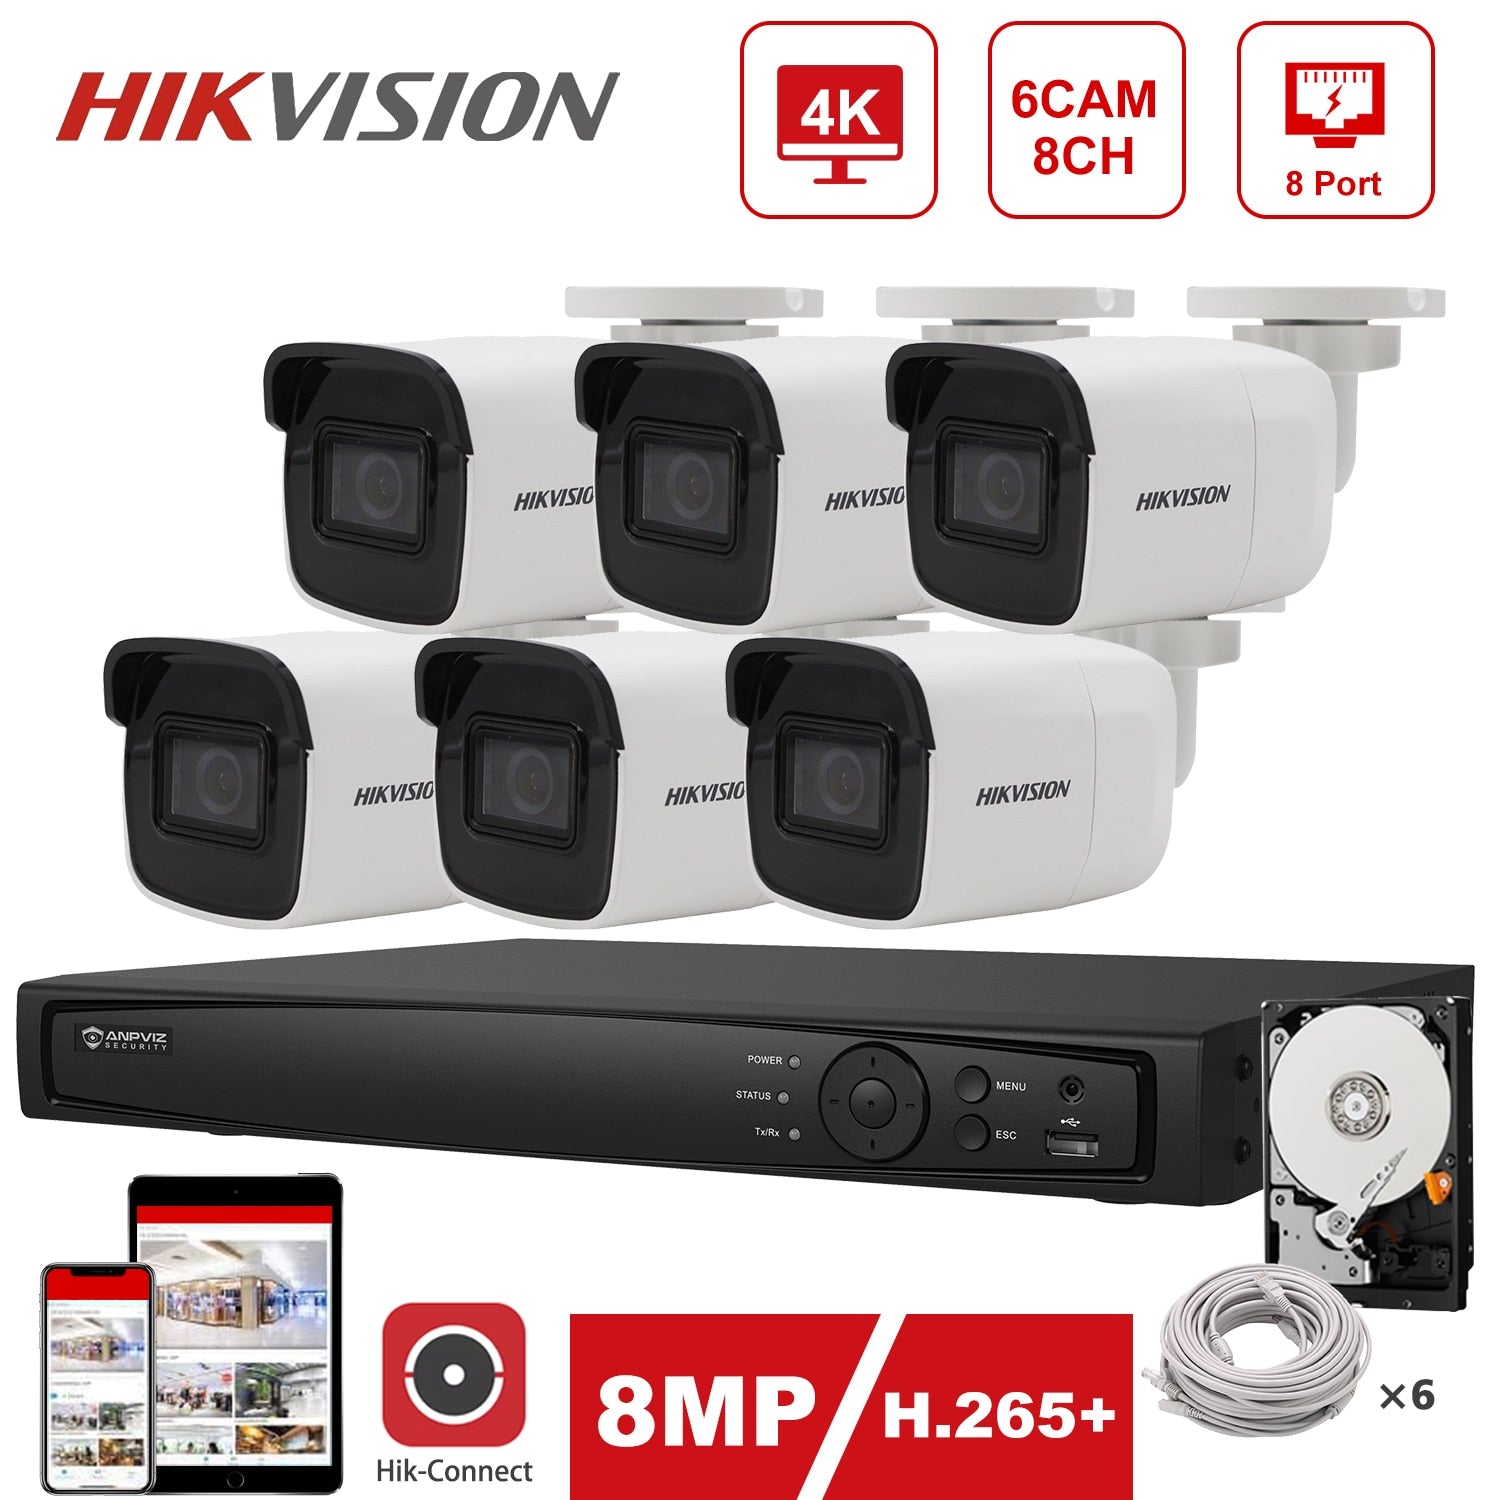 Hikvision IP Security System 4K 8CH POE NVR 4pcs Hikvision 8MP IP Camera DS-2CD2085G1-I Indoor/Outdoor Hik-Connect Plug and Play